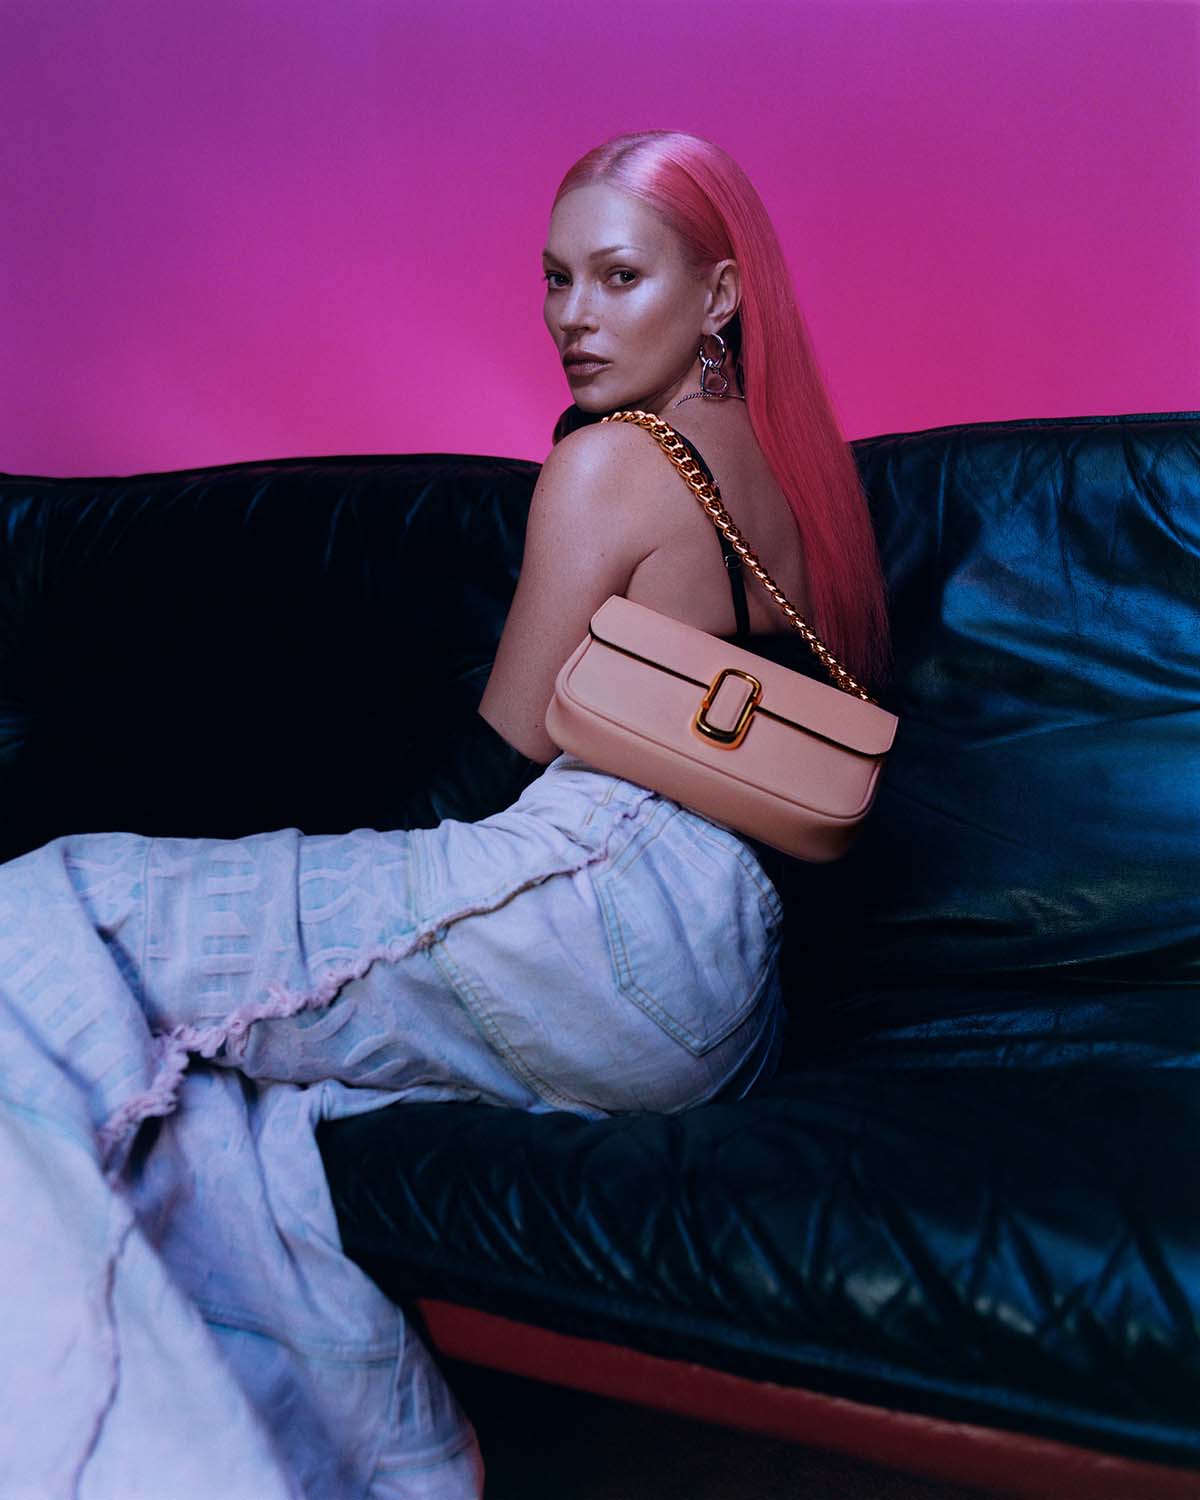 Kate Moss Resurrects Her Iconic Pink Hair in Marc Jacobs Ad